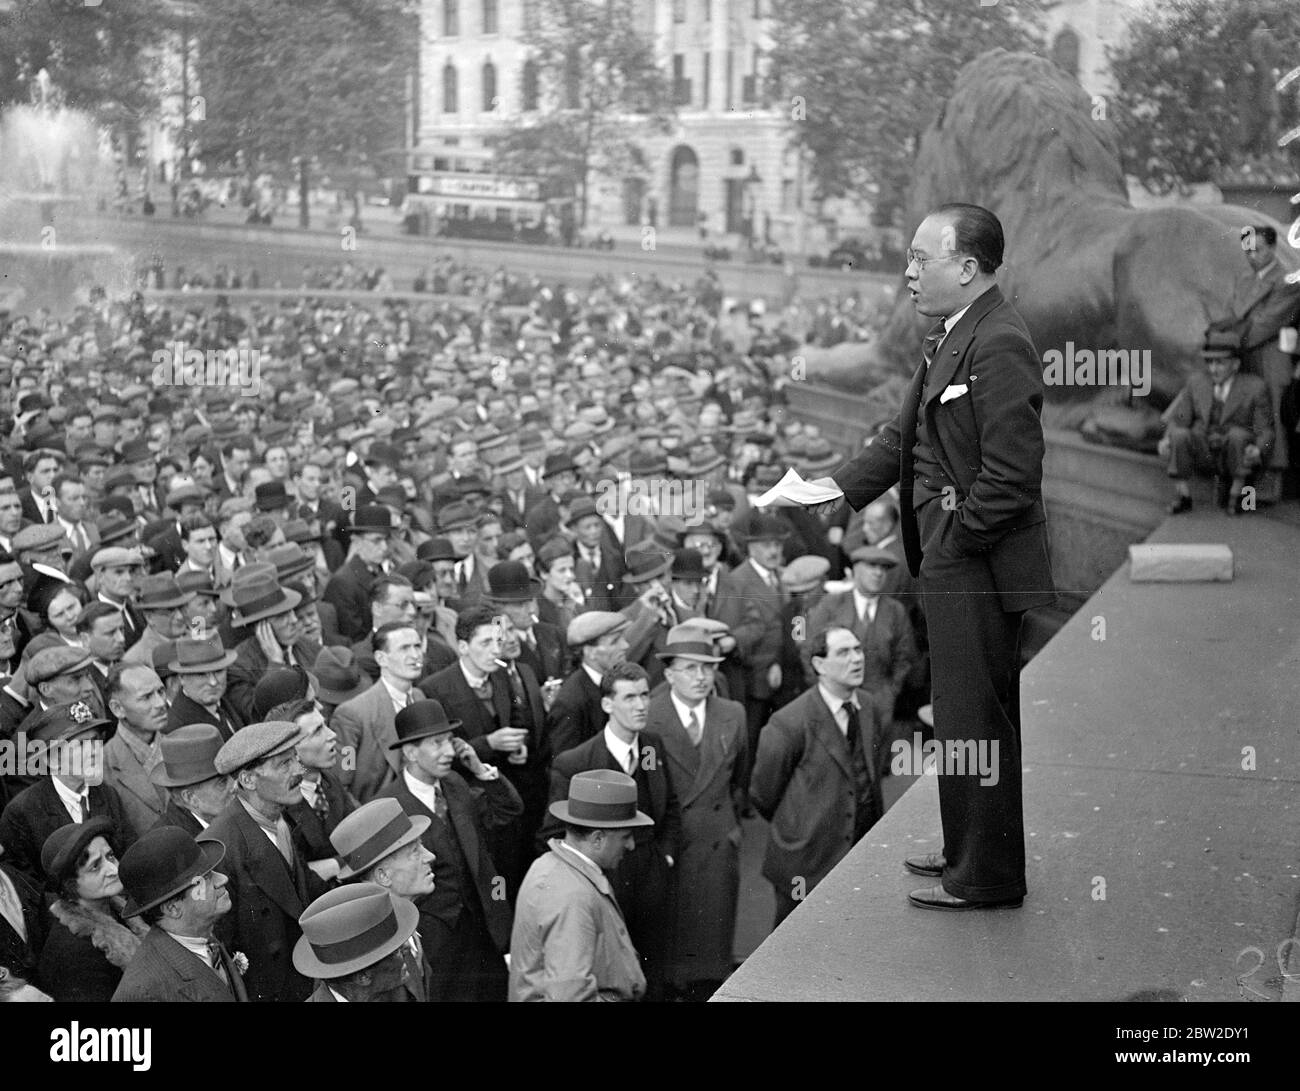 Several Chinese were among the speakers are members of London's Chinese colony formed part of the audience at a great mass meeting held in Trafalgar Square, London to protest against Japanese attacks on civilians in China. Mr Lien who deputised for General Yang, addressing the meeting in Trafalgar Square. 10 October 1937. Stock Photo